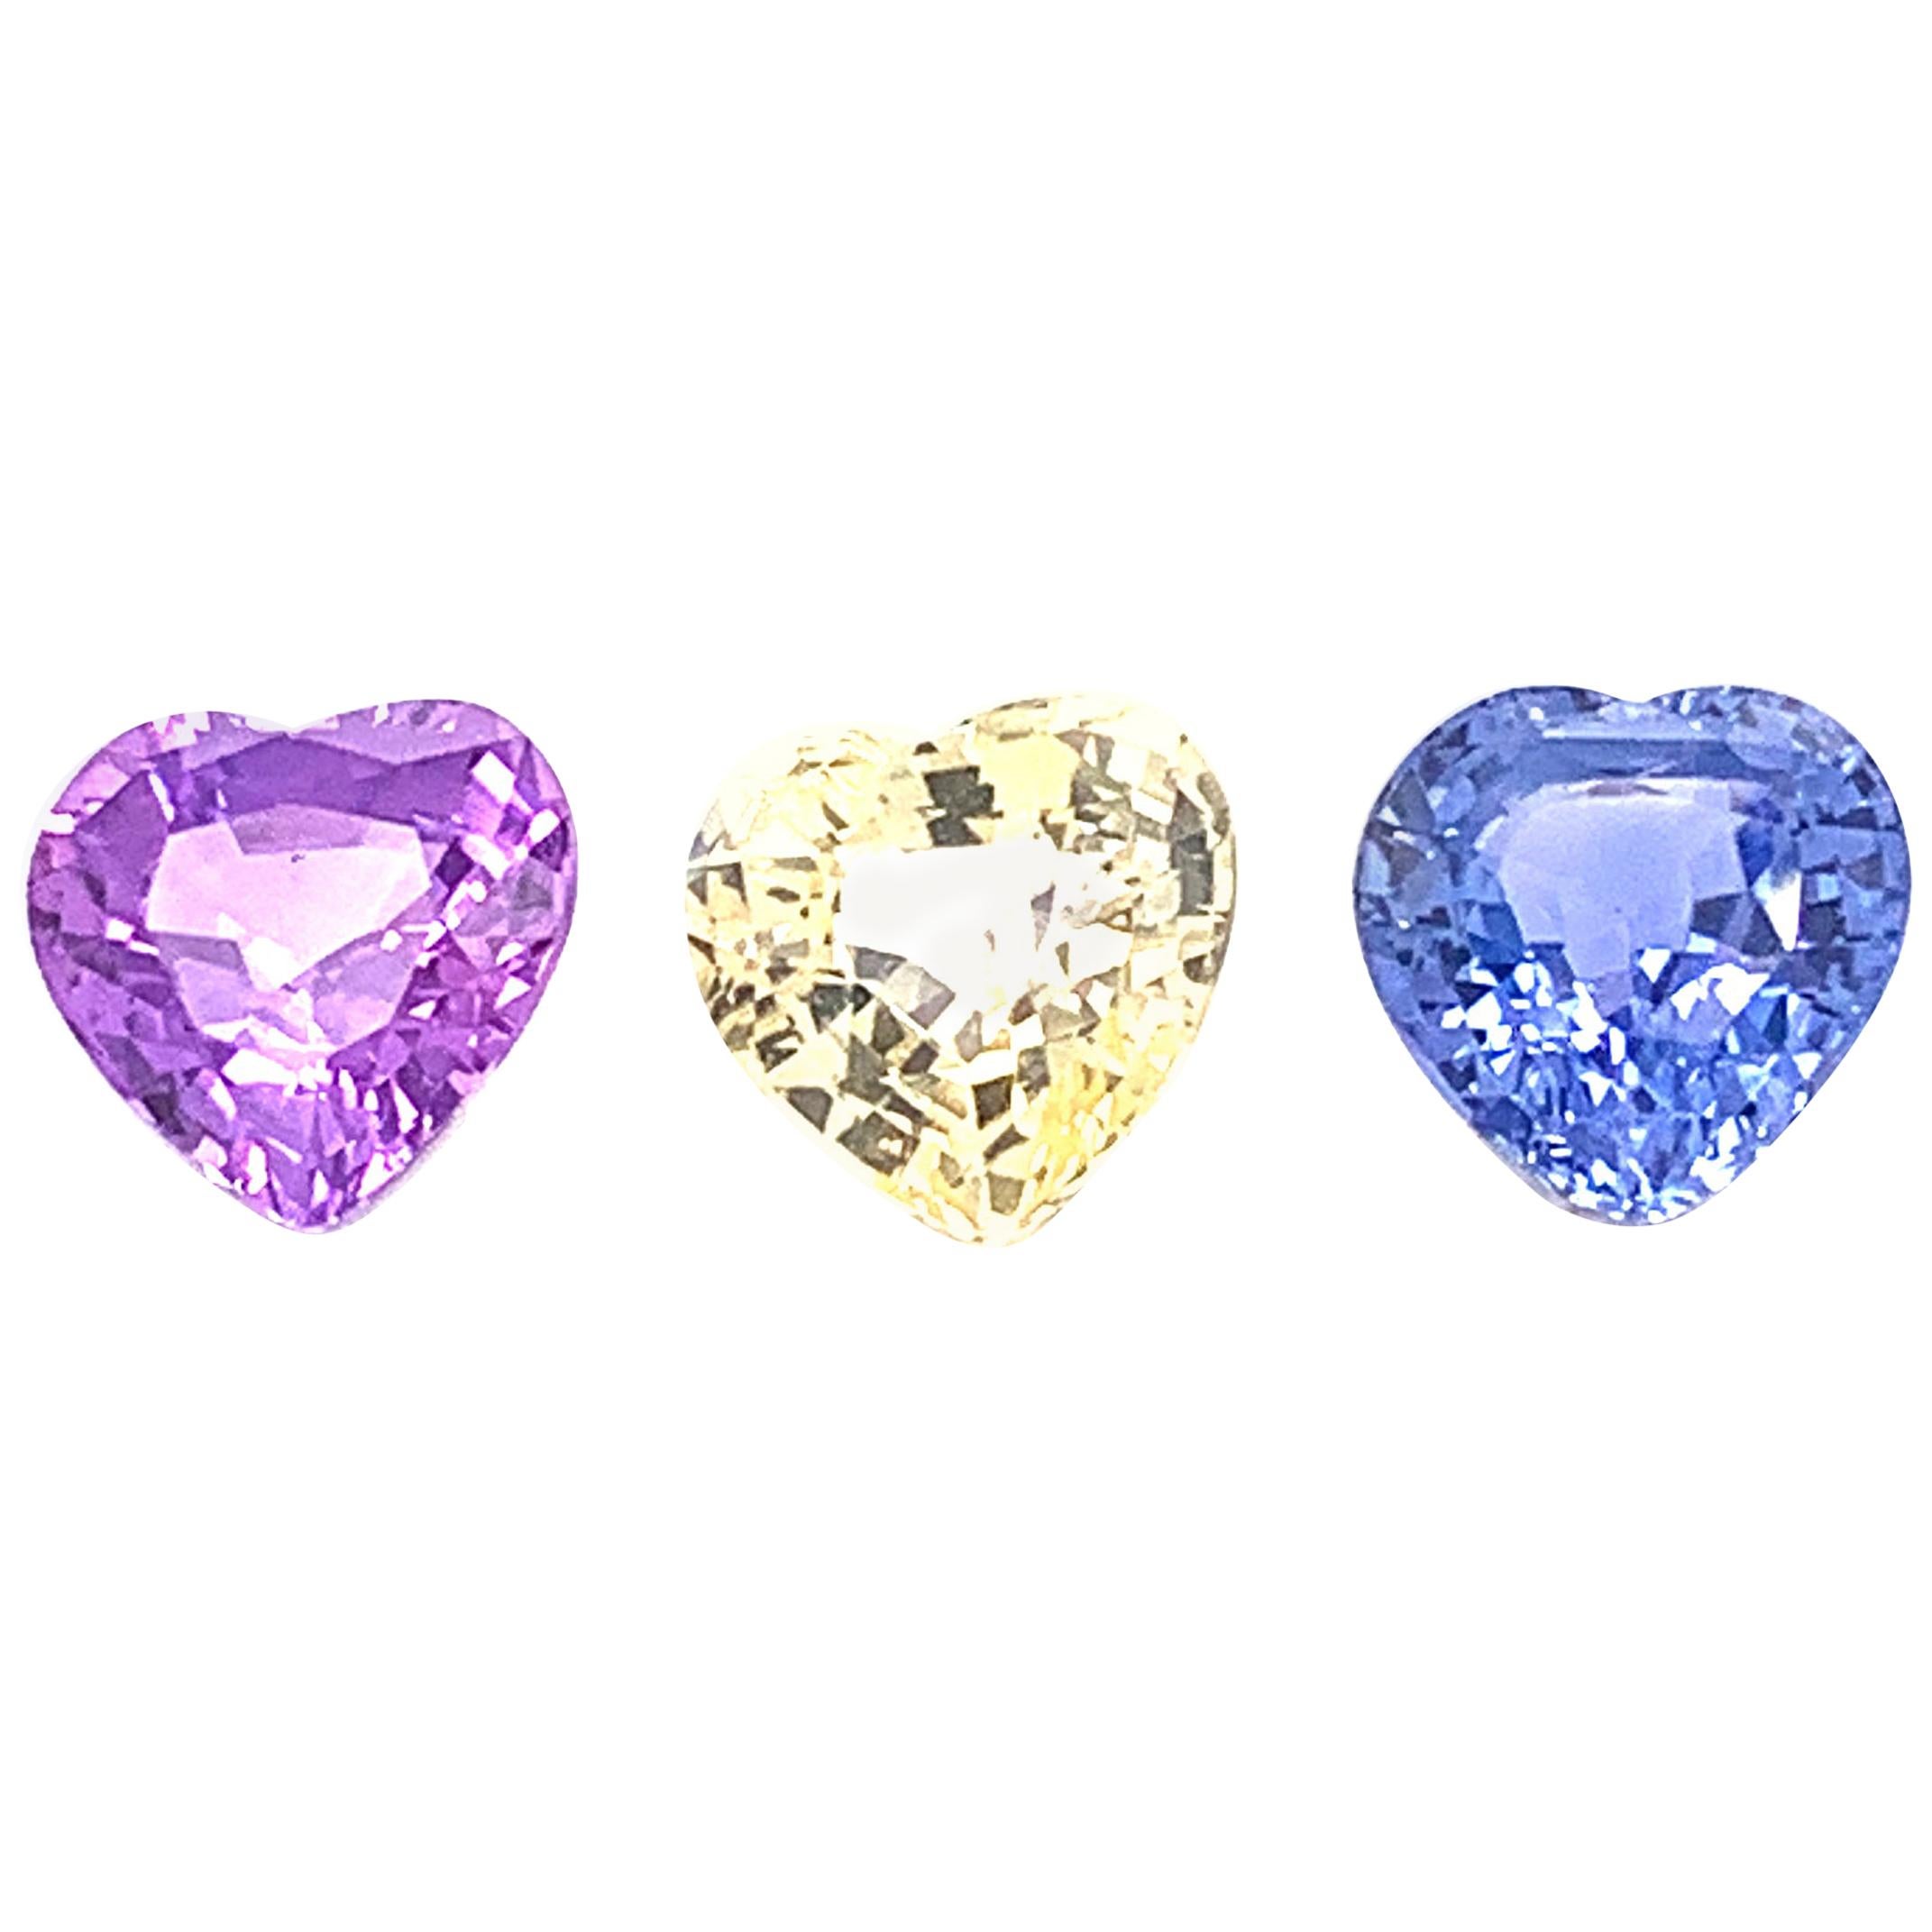 7.22 Carat Heart-Shaped Unheated Blue, Pink, and Yellow Sapphire Trio ...